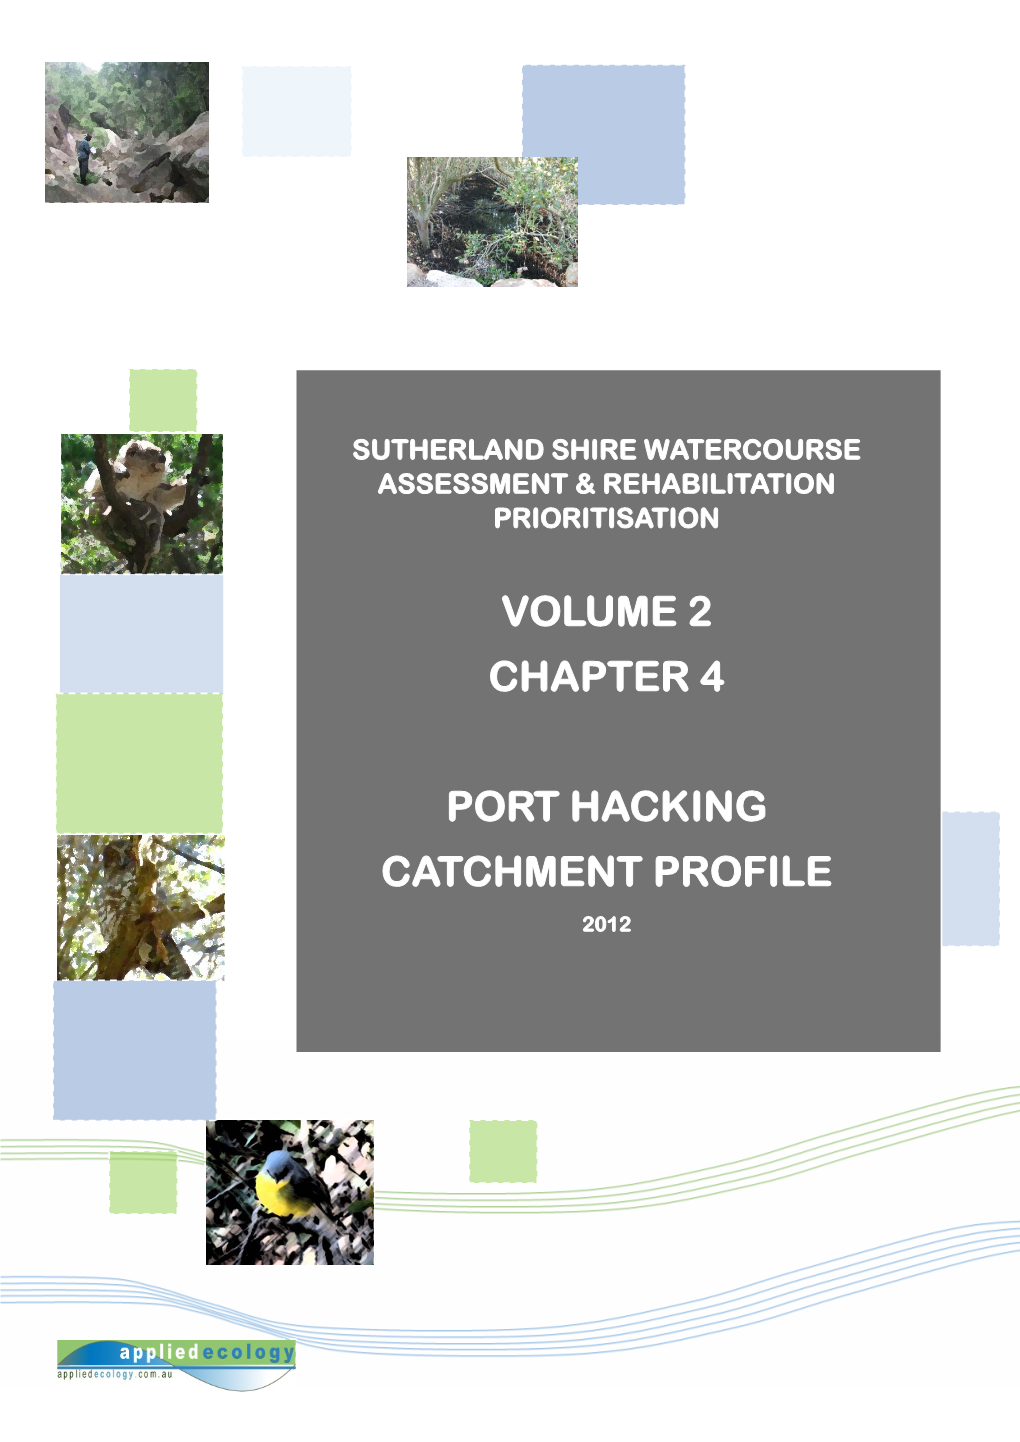 Volume 2 Chapter 4 Port Hacking Catchment Profile